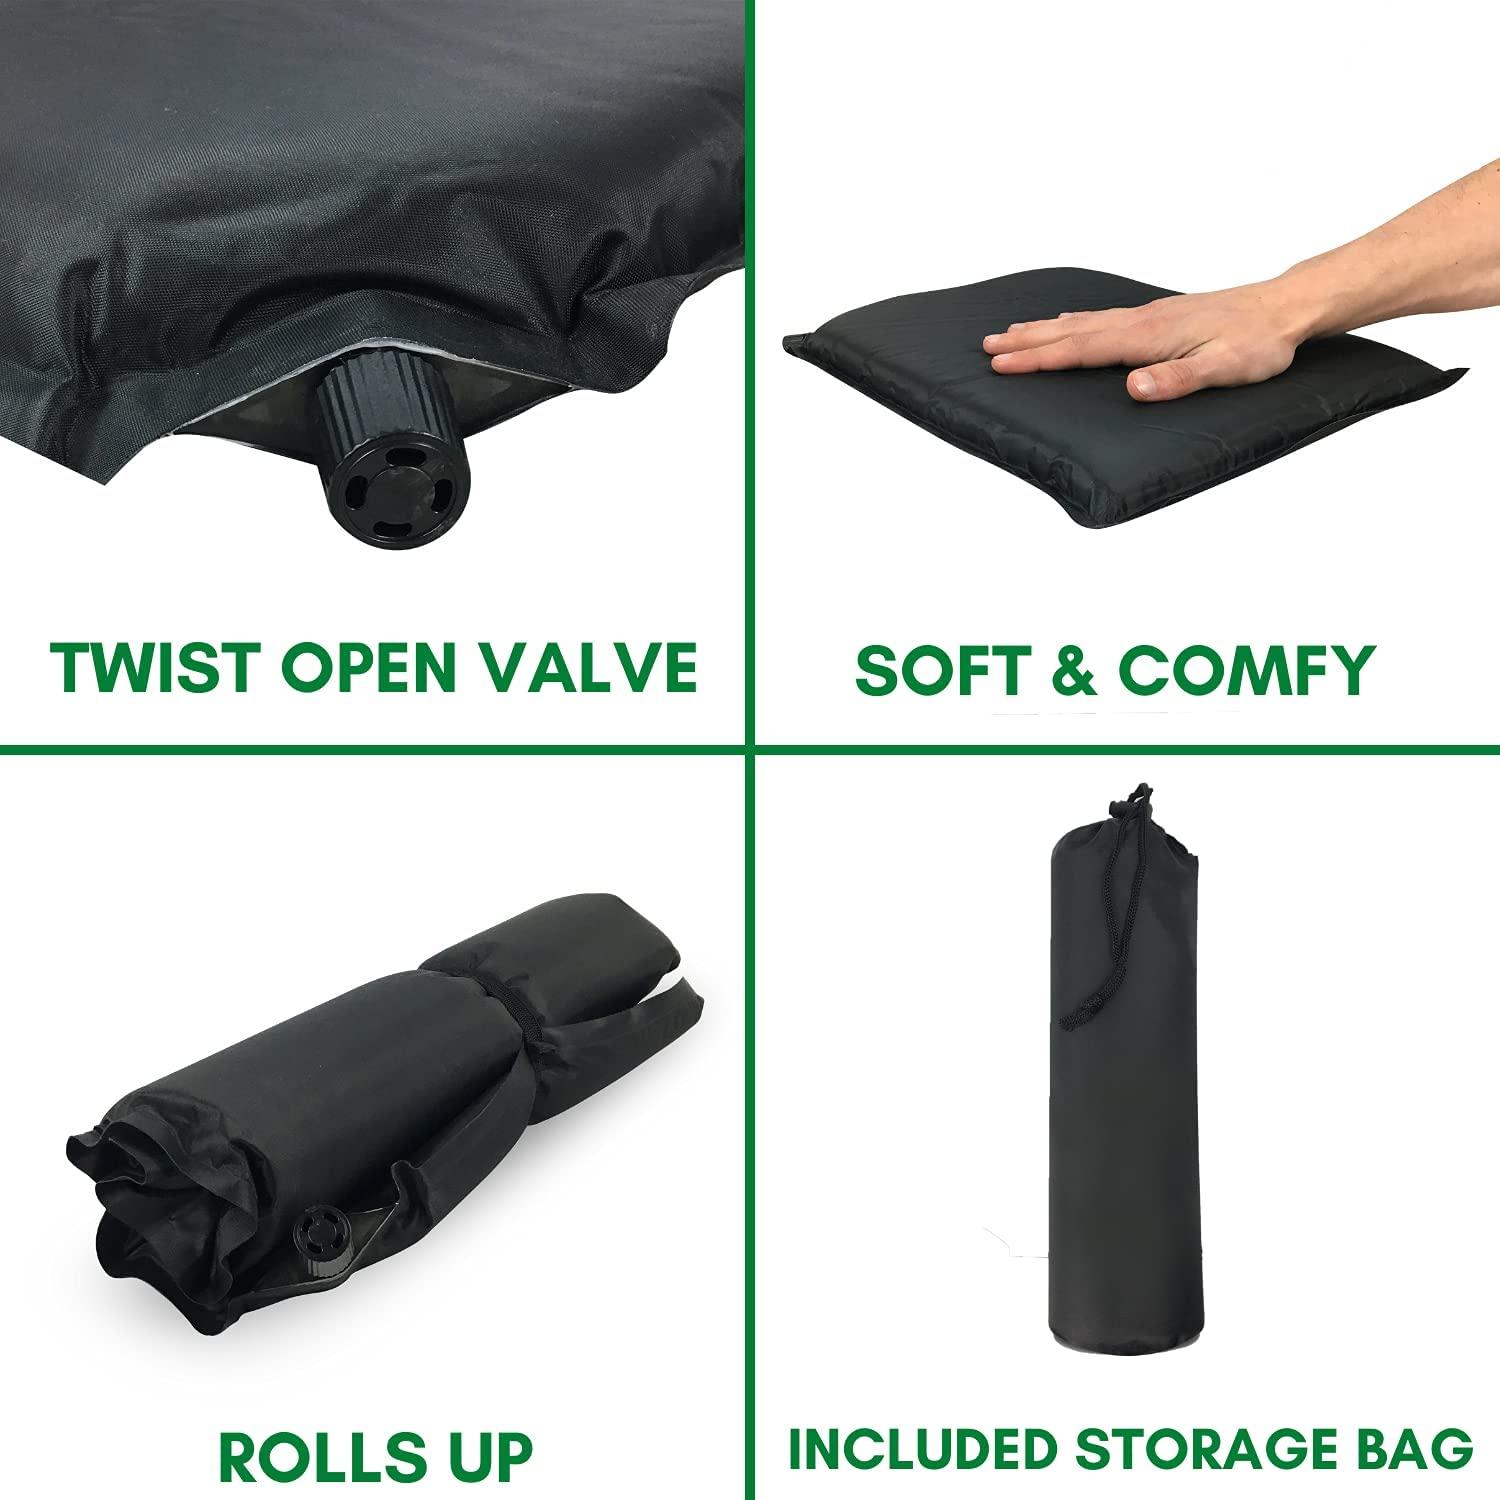 The Outdoor Optimist Inflatable Travel Cushion, Waterproof, Portable Seat  Cushion with Travel Bag for Camping, Sporting